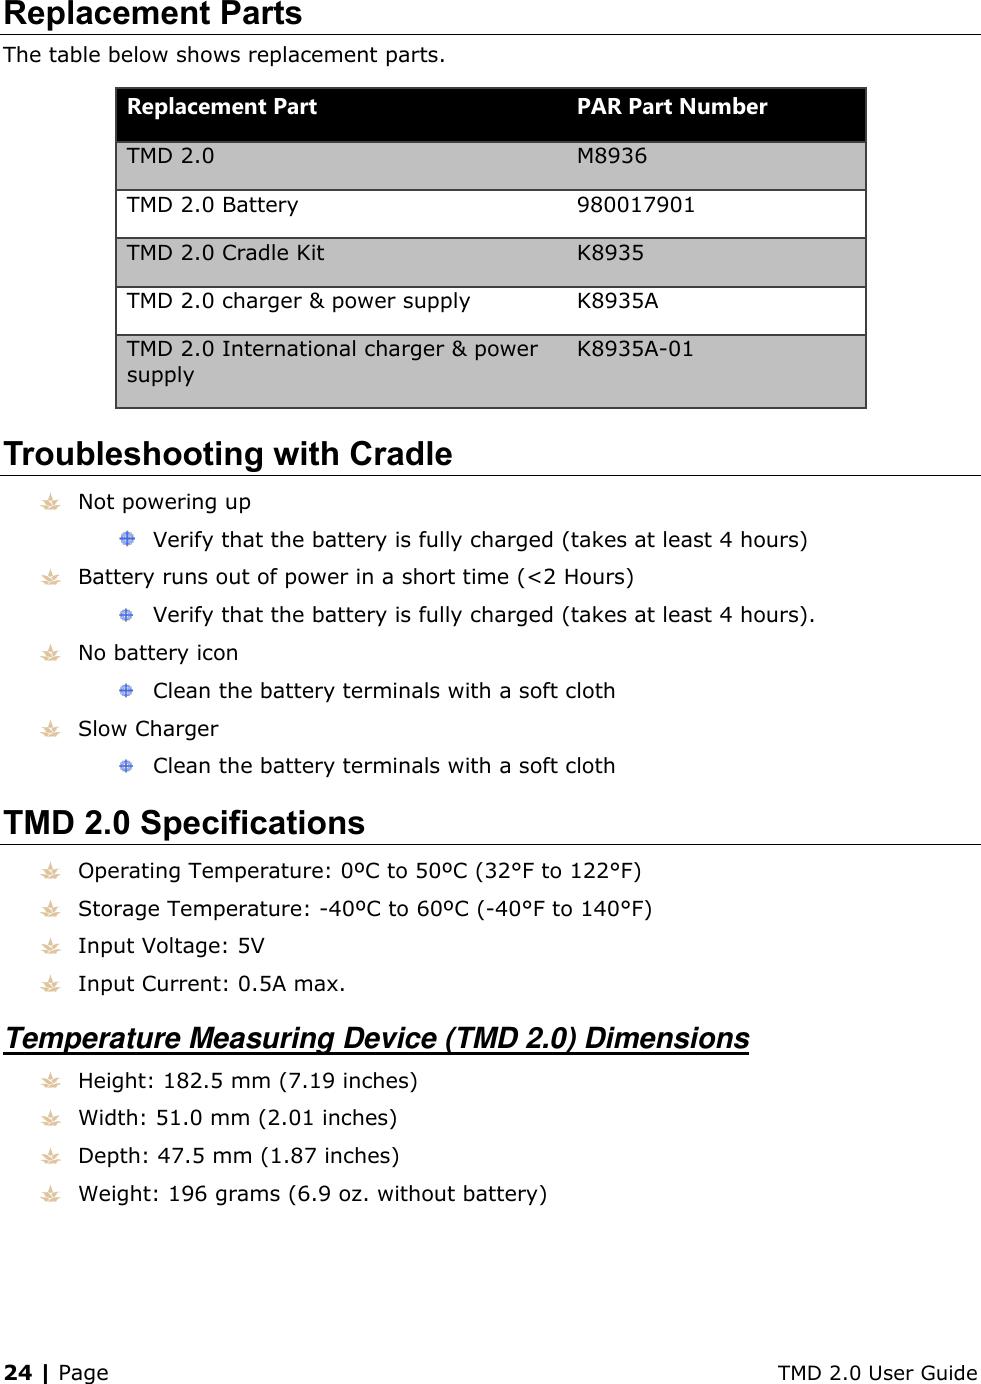 24 | Page    TMD 2.0 User Guide Replacement Parts The table below shows replacement parts. Replacement Part PAR Part Number TMD 2.0 M8936 TMD 2.0 Battery 980017901 TMD 2.0 Cradle Kit K8935 TMD 2.0 charger &amp; power supply K8935A TMD 2.0 International charger &amp; power supply K8935A-01 Troubleshooting with Cradle  Not powering up  Verify that the battery is fully charged (takes at least 4 hours)  Battery runs out of power in a short time (&lt;2 Hours)  Verify that the battery is fully charged (takes at least 4 hours).  No battery icon  Clean the battery terminals with a soft cloth  Slow Charger  Clean the battery terminals with a soft cloth TMD 2.0 Specifications  Operating Temperature: 0ºC to 50ºC (32°F to 122°F)  Storage Temperature: -40ºC to 60ºC (-40°F to 140°F)  Input Voltage: 5V  Input Current: 0.5A max. Temperature Measuring Device (TMD 2.0) Dimensions  Height: 182.5 mm (7.19 inches)  Width: 51.0 mm (2.01 inches)  Depth: 47.5 mm (1.87 inches)  Weight: 196 grams (6.9 oz. without battery) 